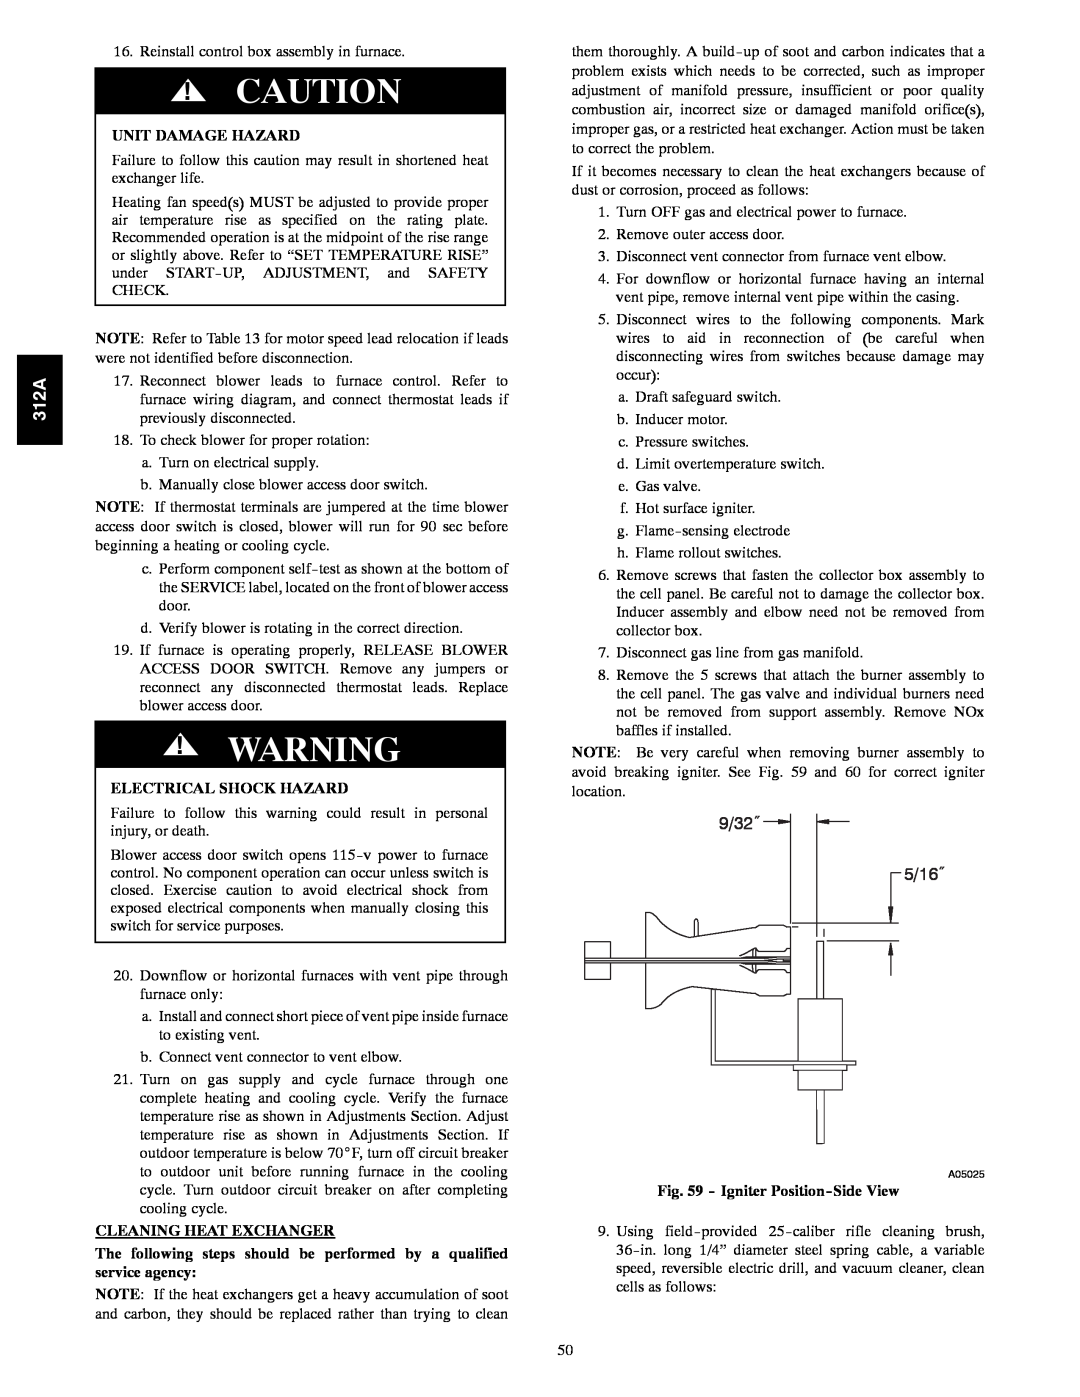 Bryant 120 instruction manual 9/32˝ 5/16˝, Unit Damage Hazard, Cleaning Heat Exchanger, Igniter Position-SideView, 312A 